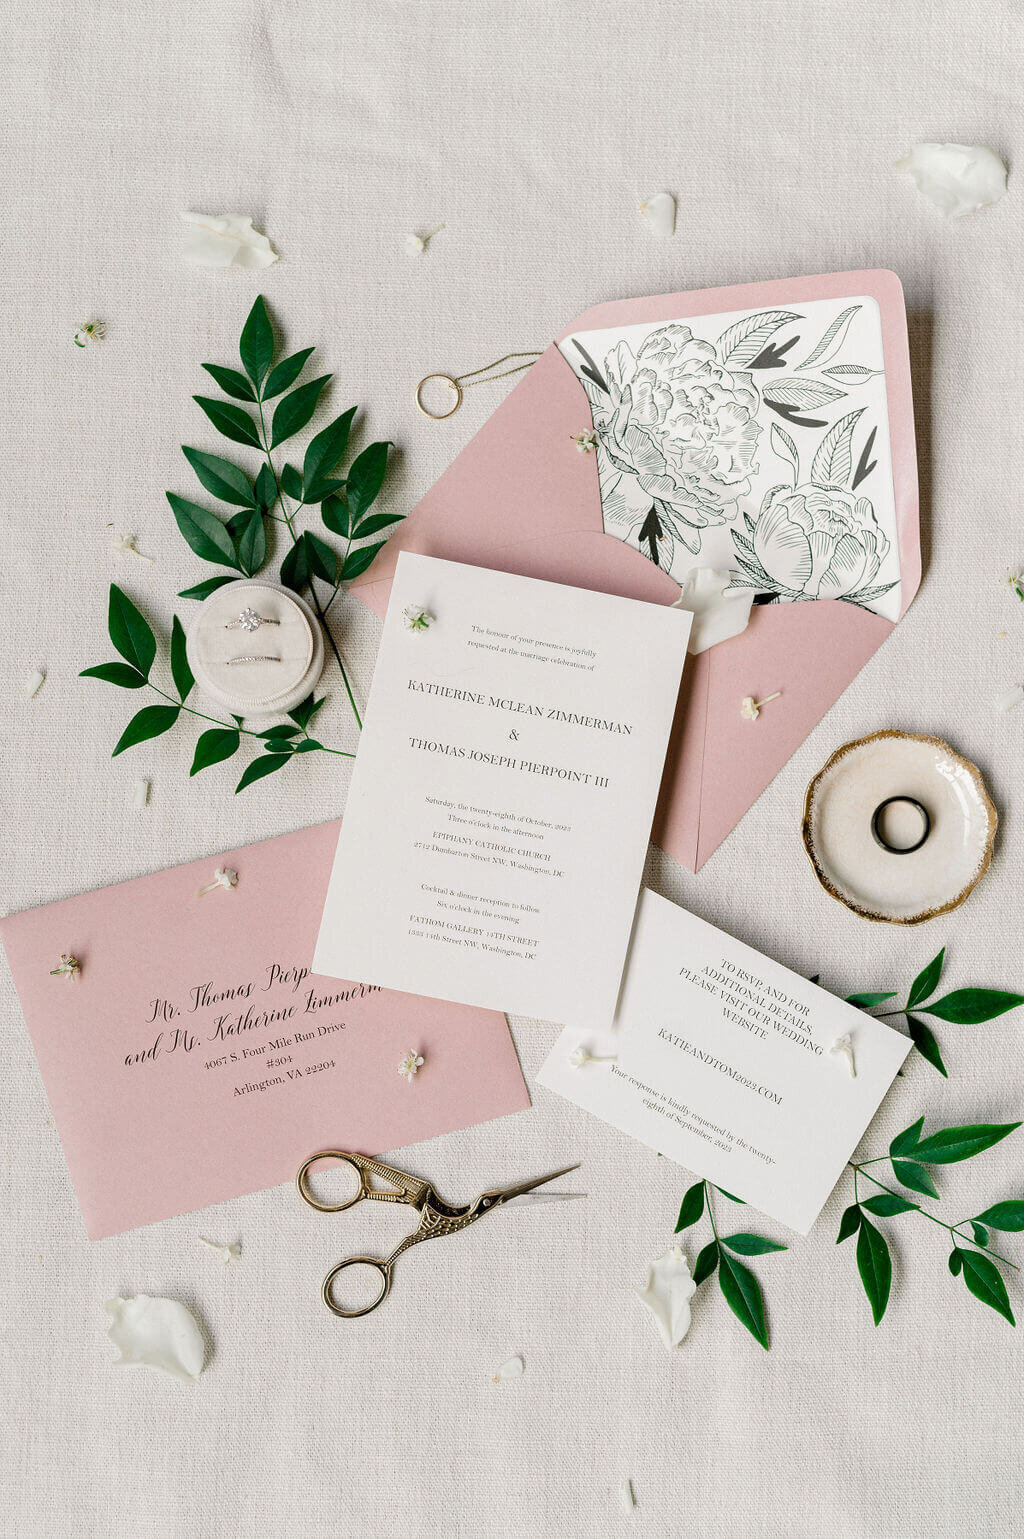 Pink and white invitation suite set up for detail photos and captured by a DMV wedding photographer